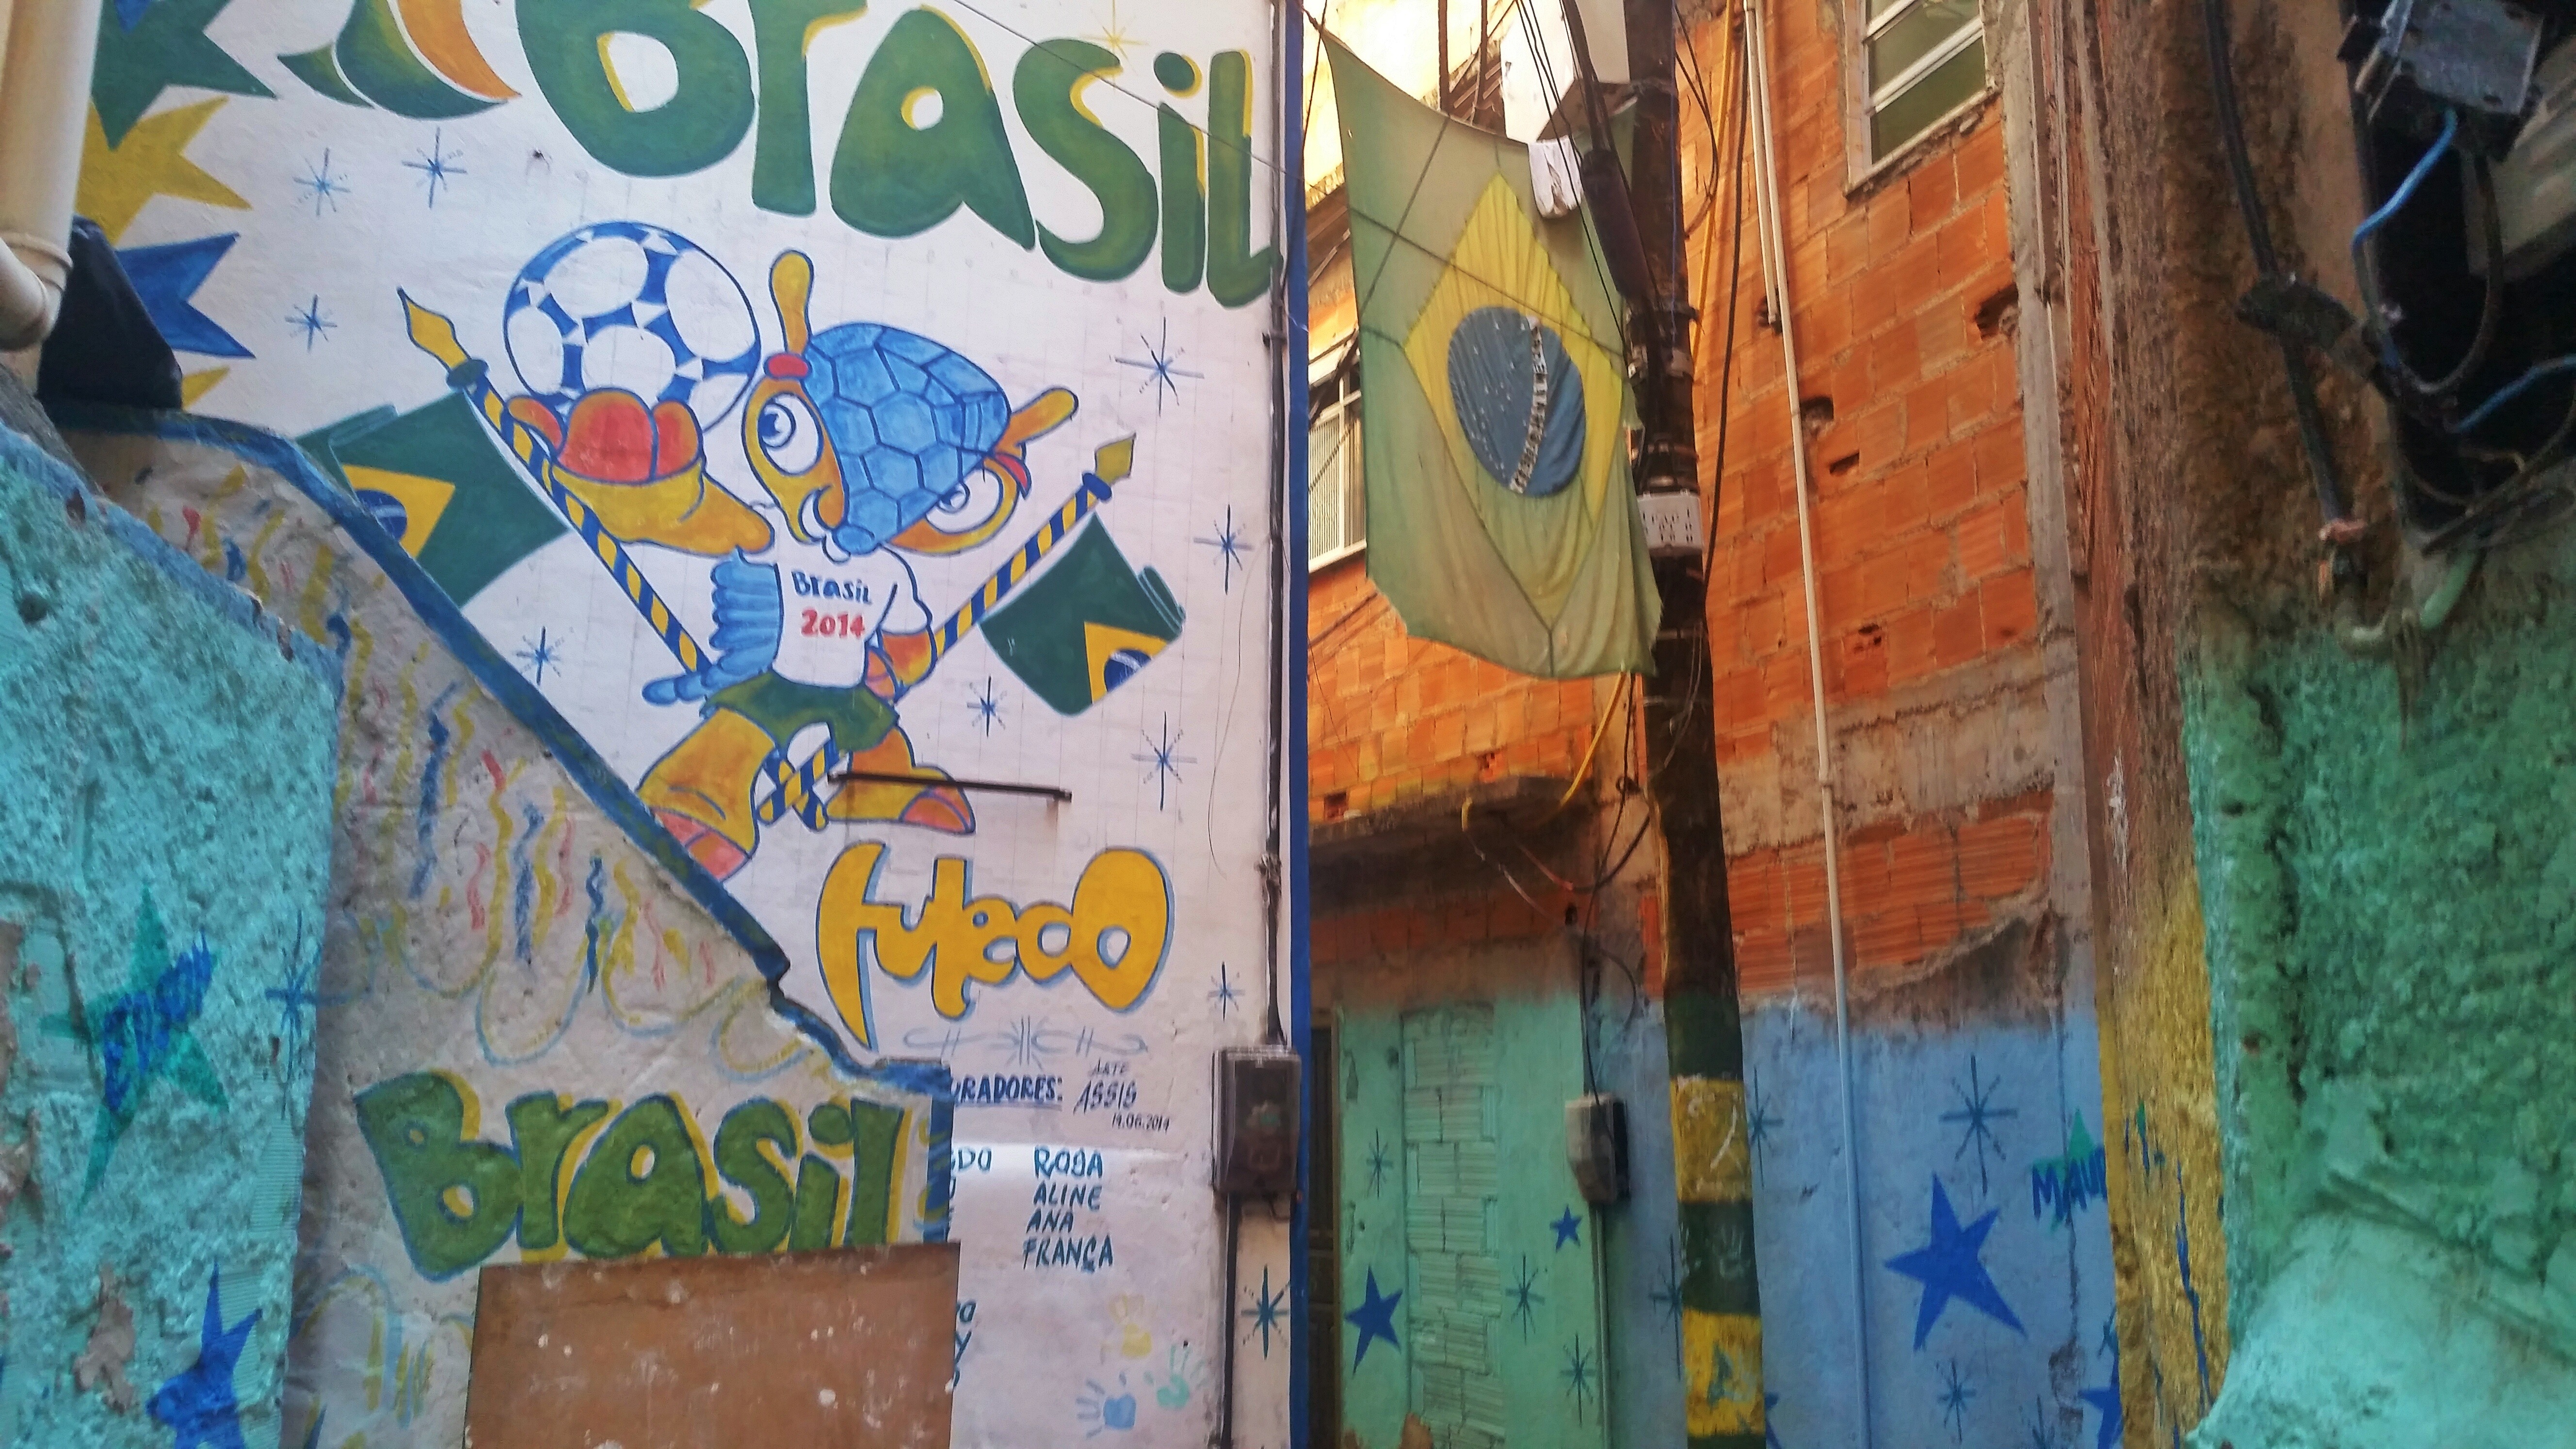 Is it safe for tourists to visit the favelas in Rio de Janeiro? - Little colourful alleyways in Chapéu Mangueira favela, Rio de Janeiro, Brazil